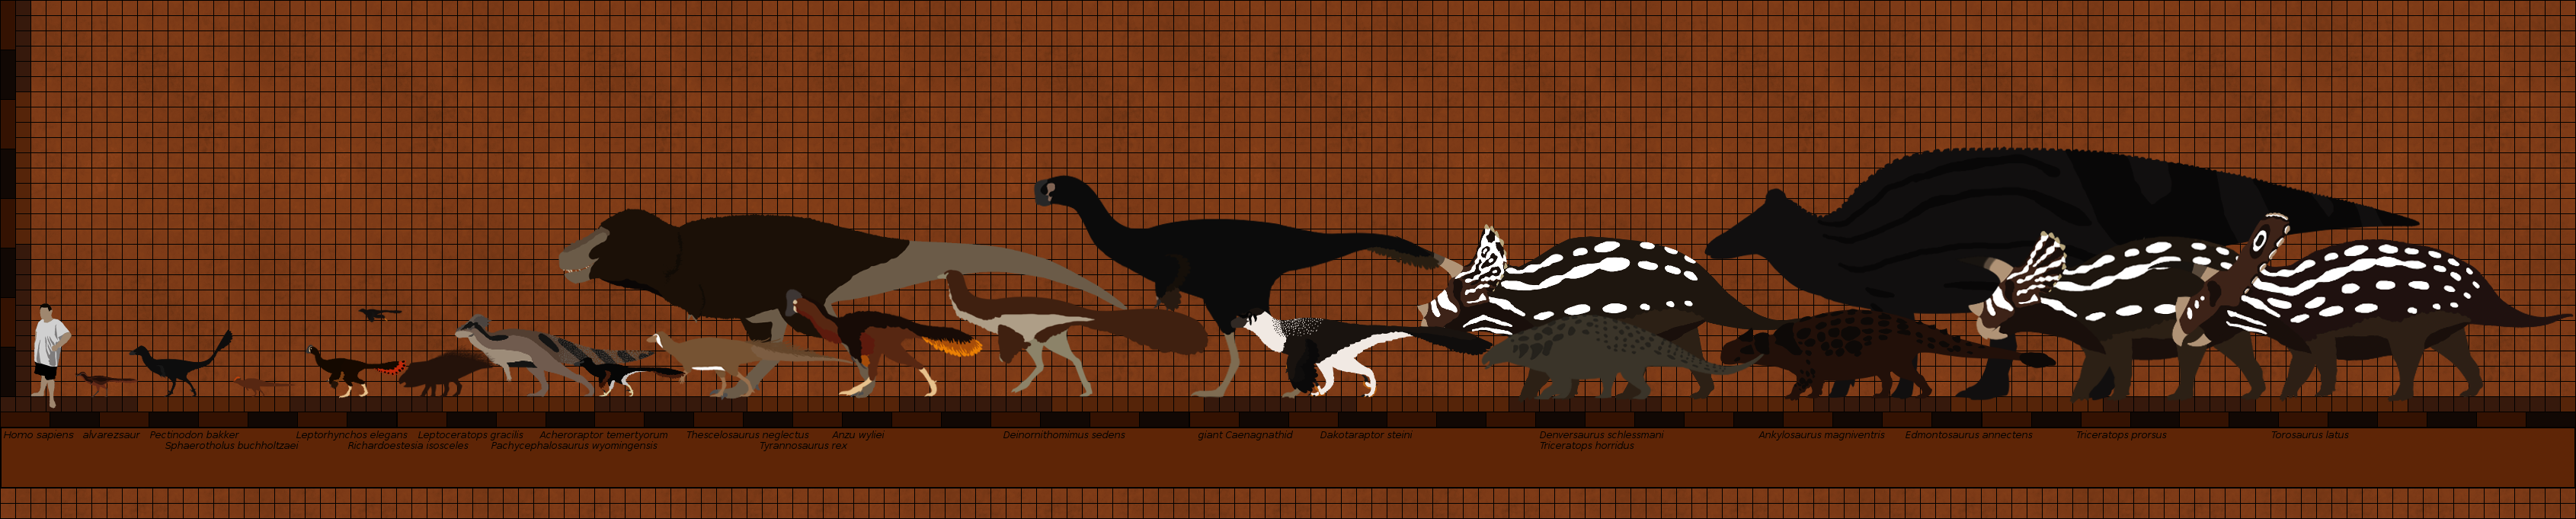 hell_creek_dinosaurs_revised_revised_revised_by_paleop-d9rt1ud.png